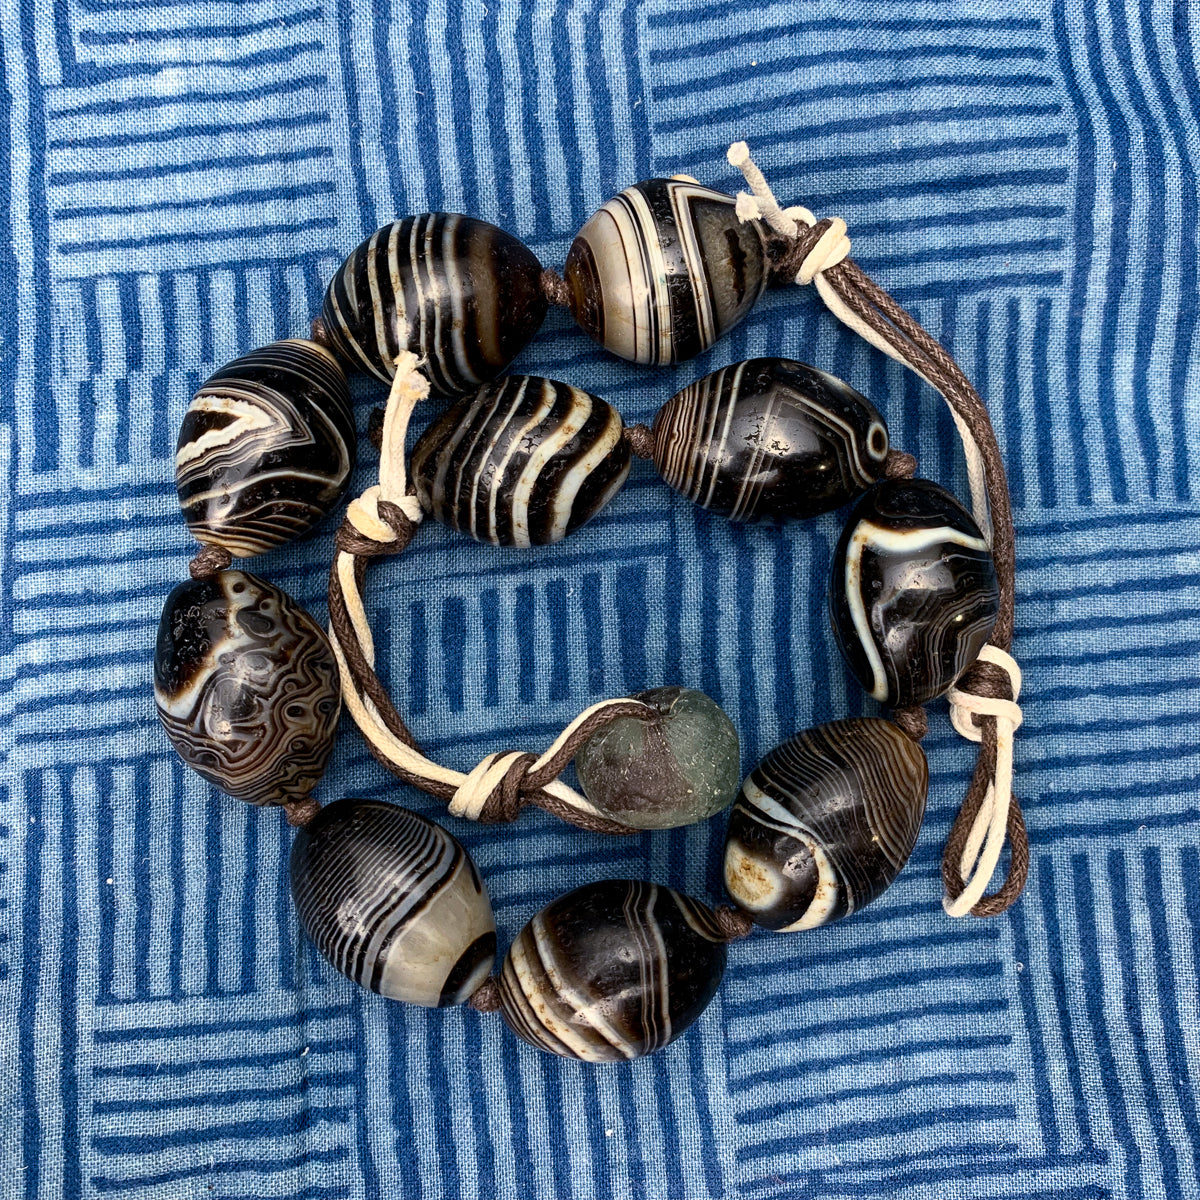 Beautiful Antique African Agate Beads #2